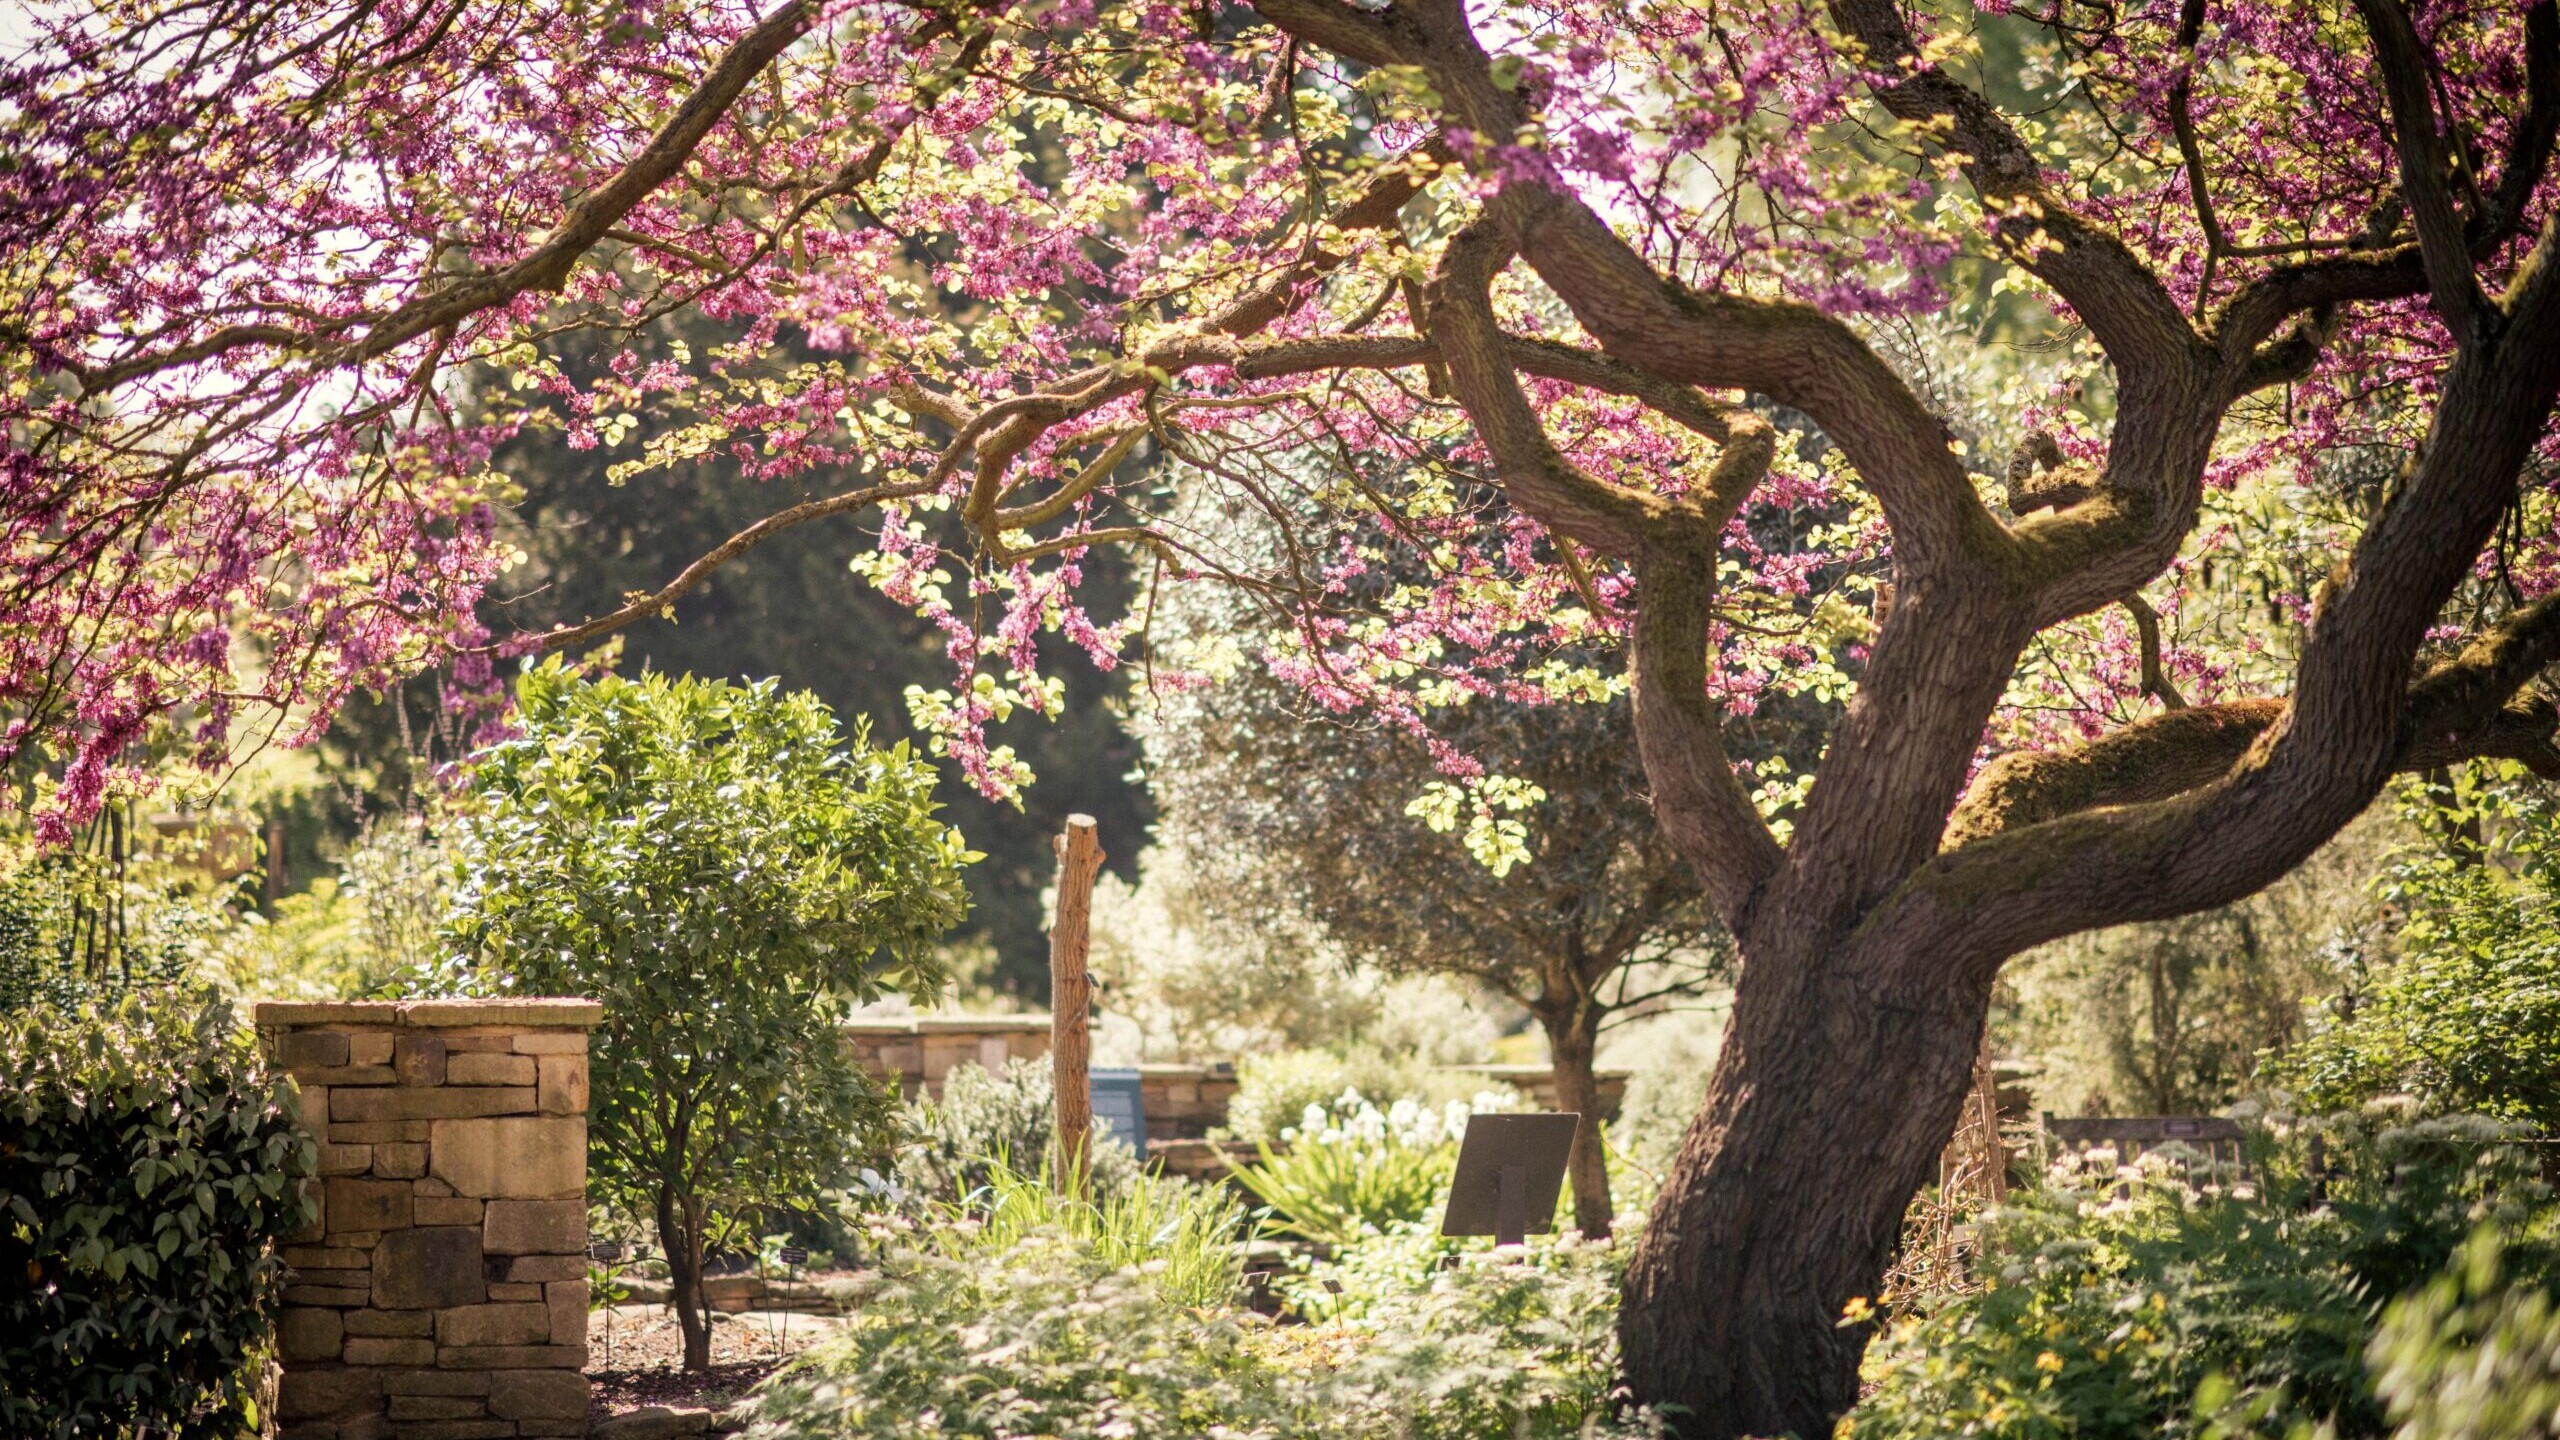 a pretty photo of a large gnarly tree with pink blossoms and many different shades of green all around it